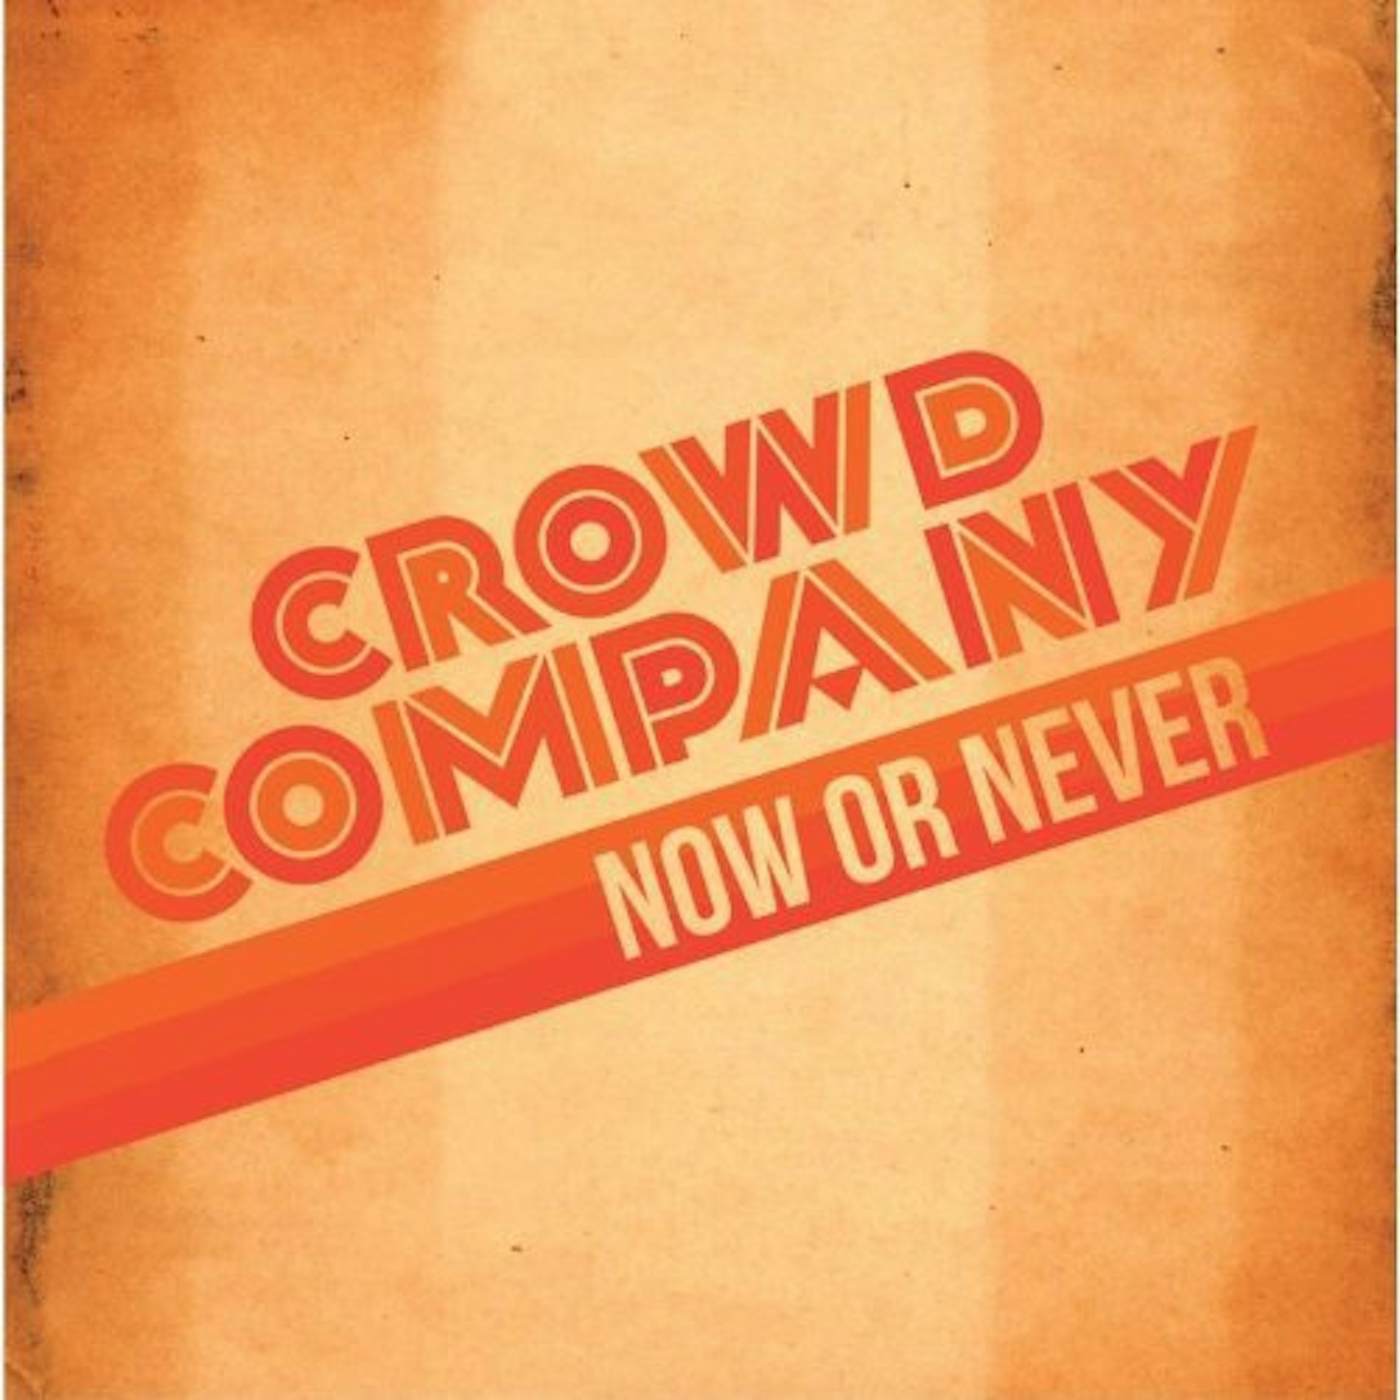 Crowd Company Now or Never Vinyl Record